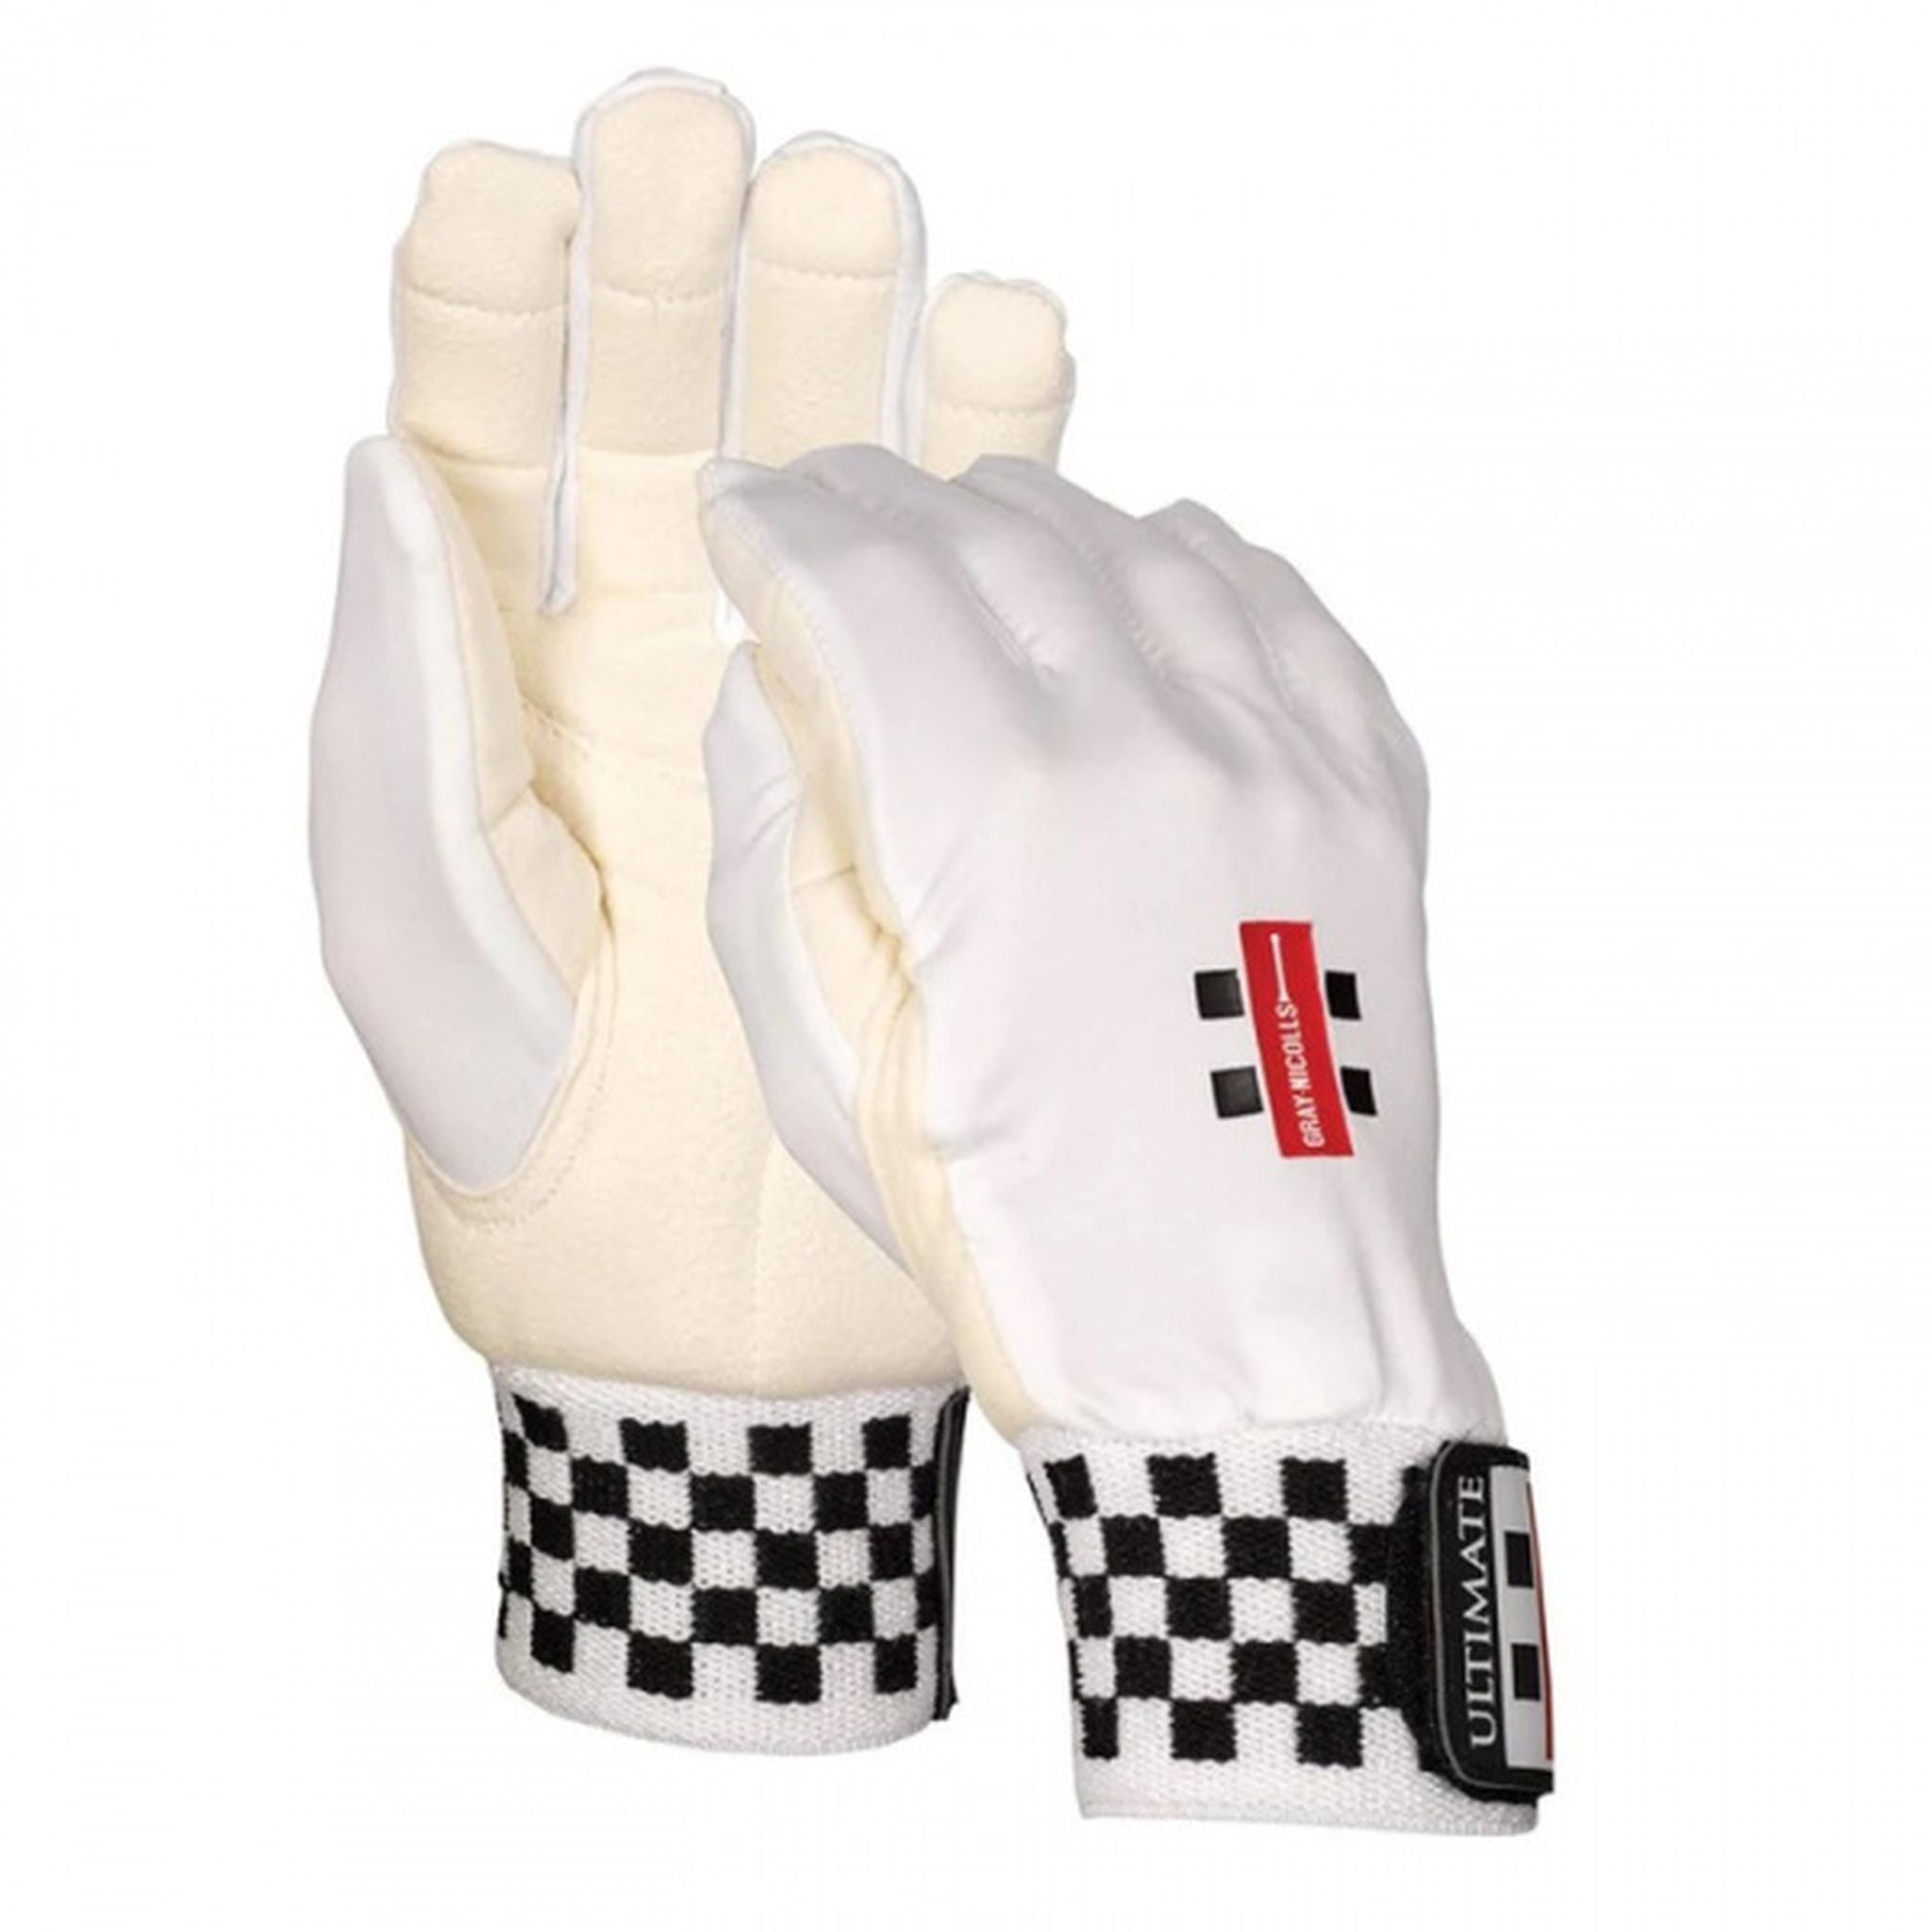 Gray-Nicolls Ultimate Cotton Padded Adult Wicket keeping Inners